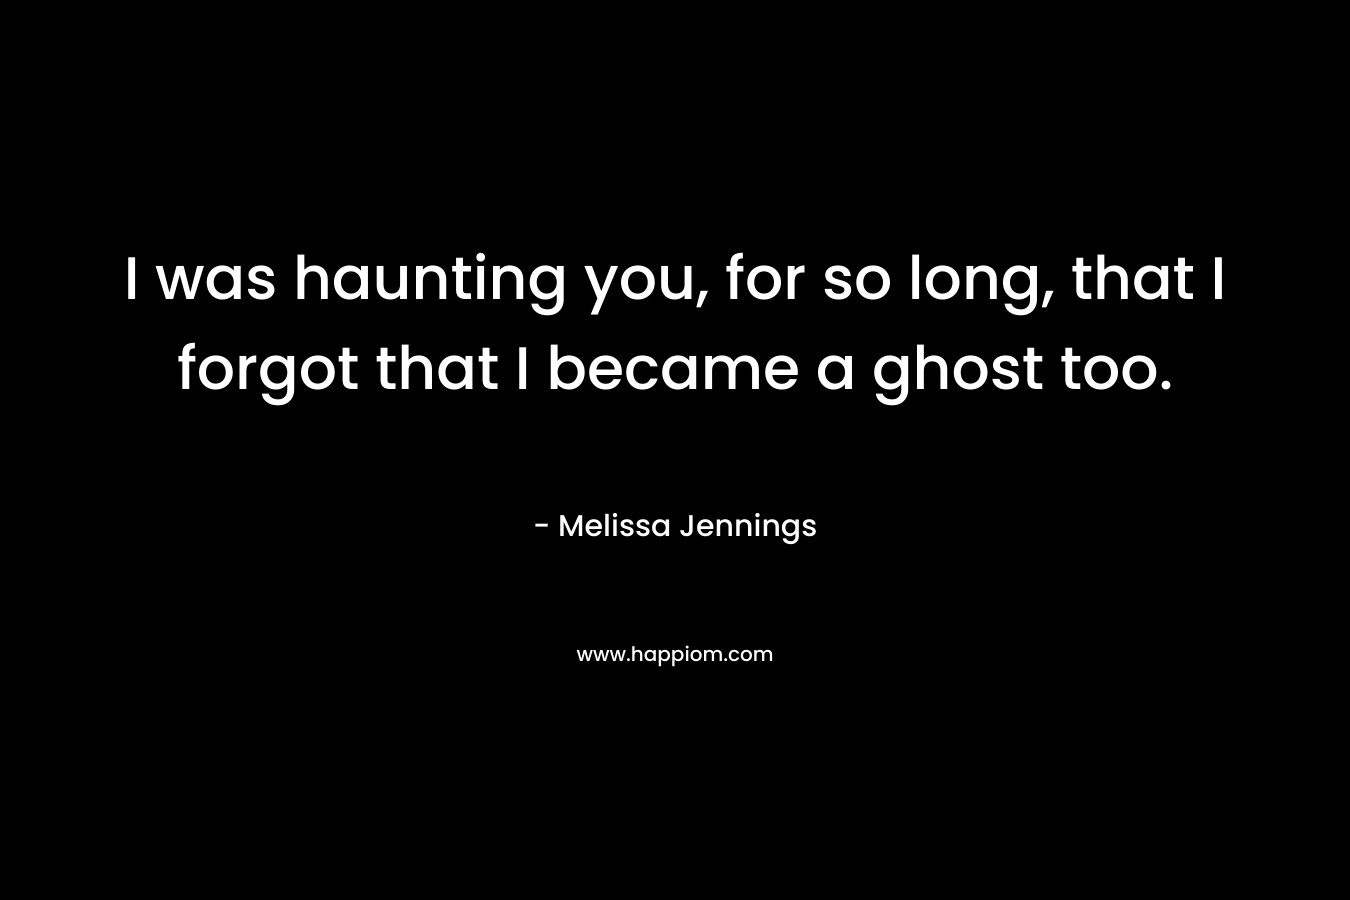 I was haunting you, for so long, that I forgot that I became a ghost too.